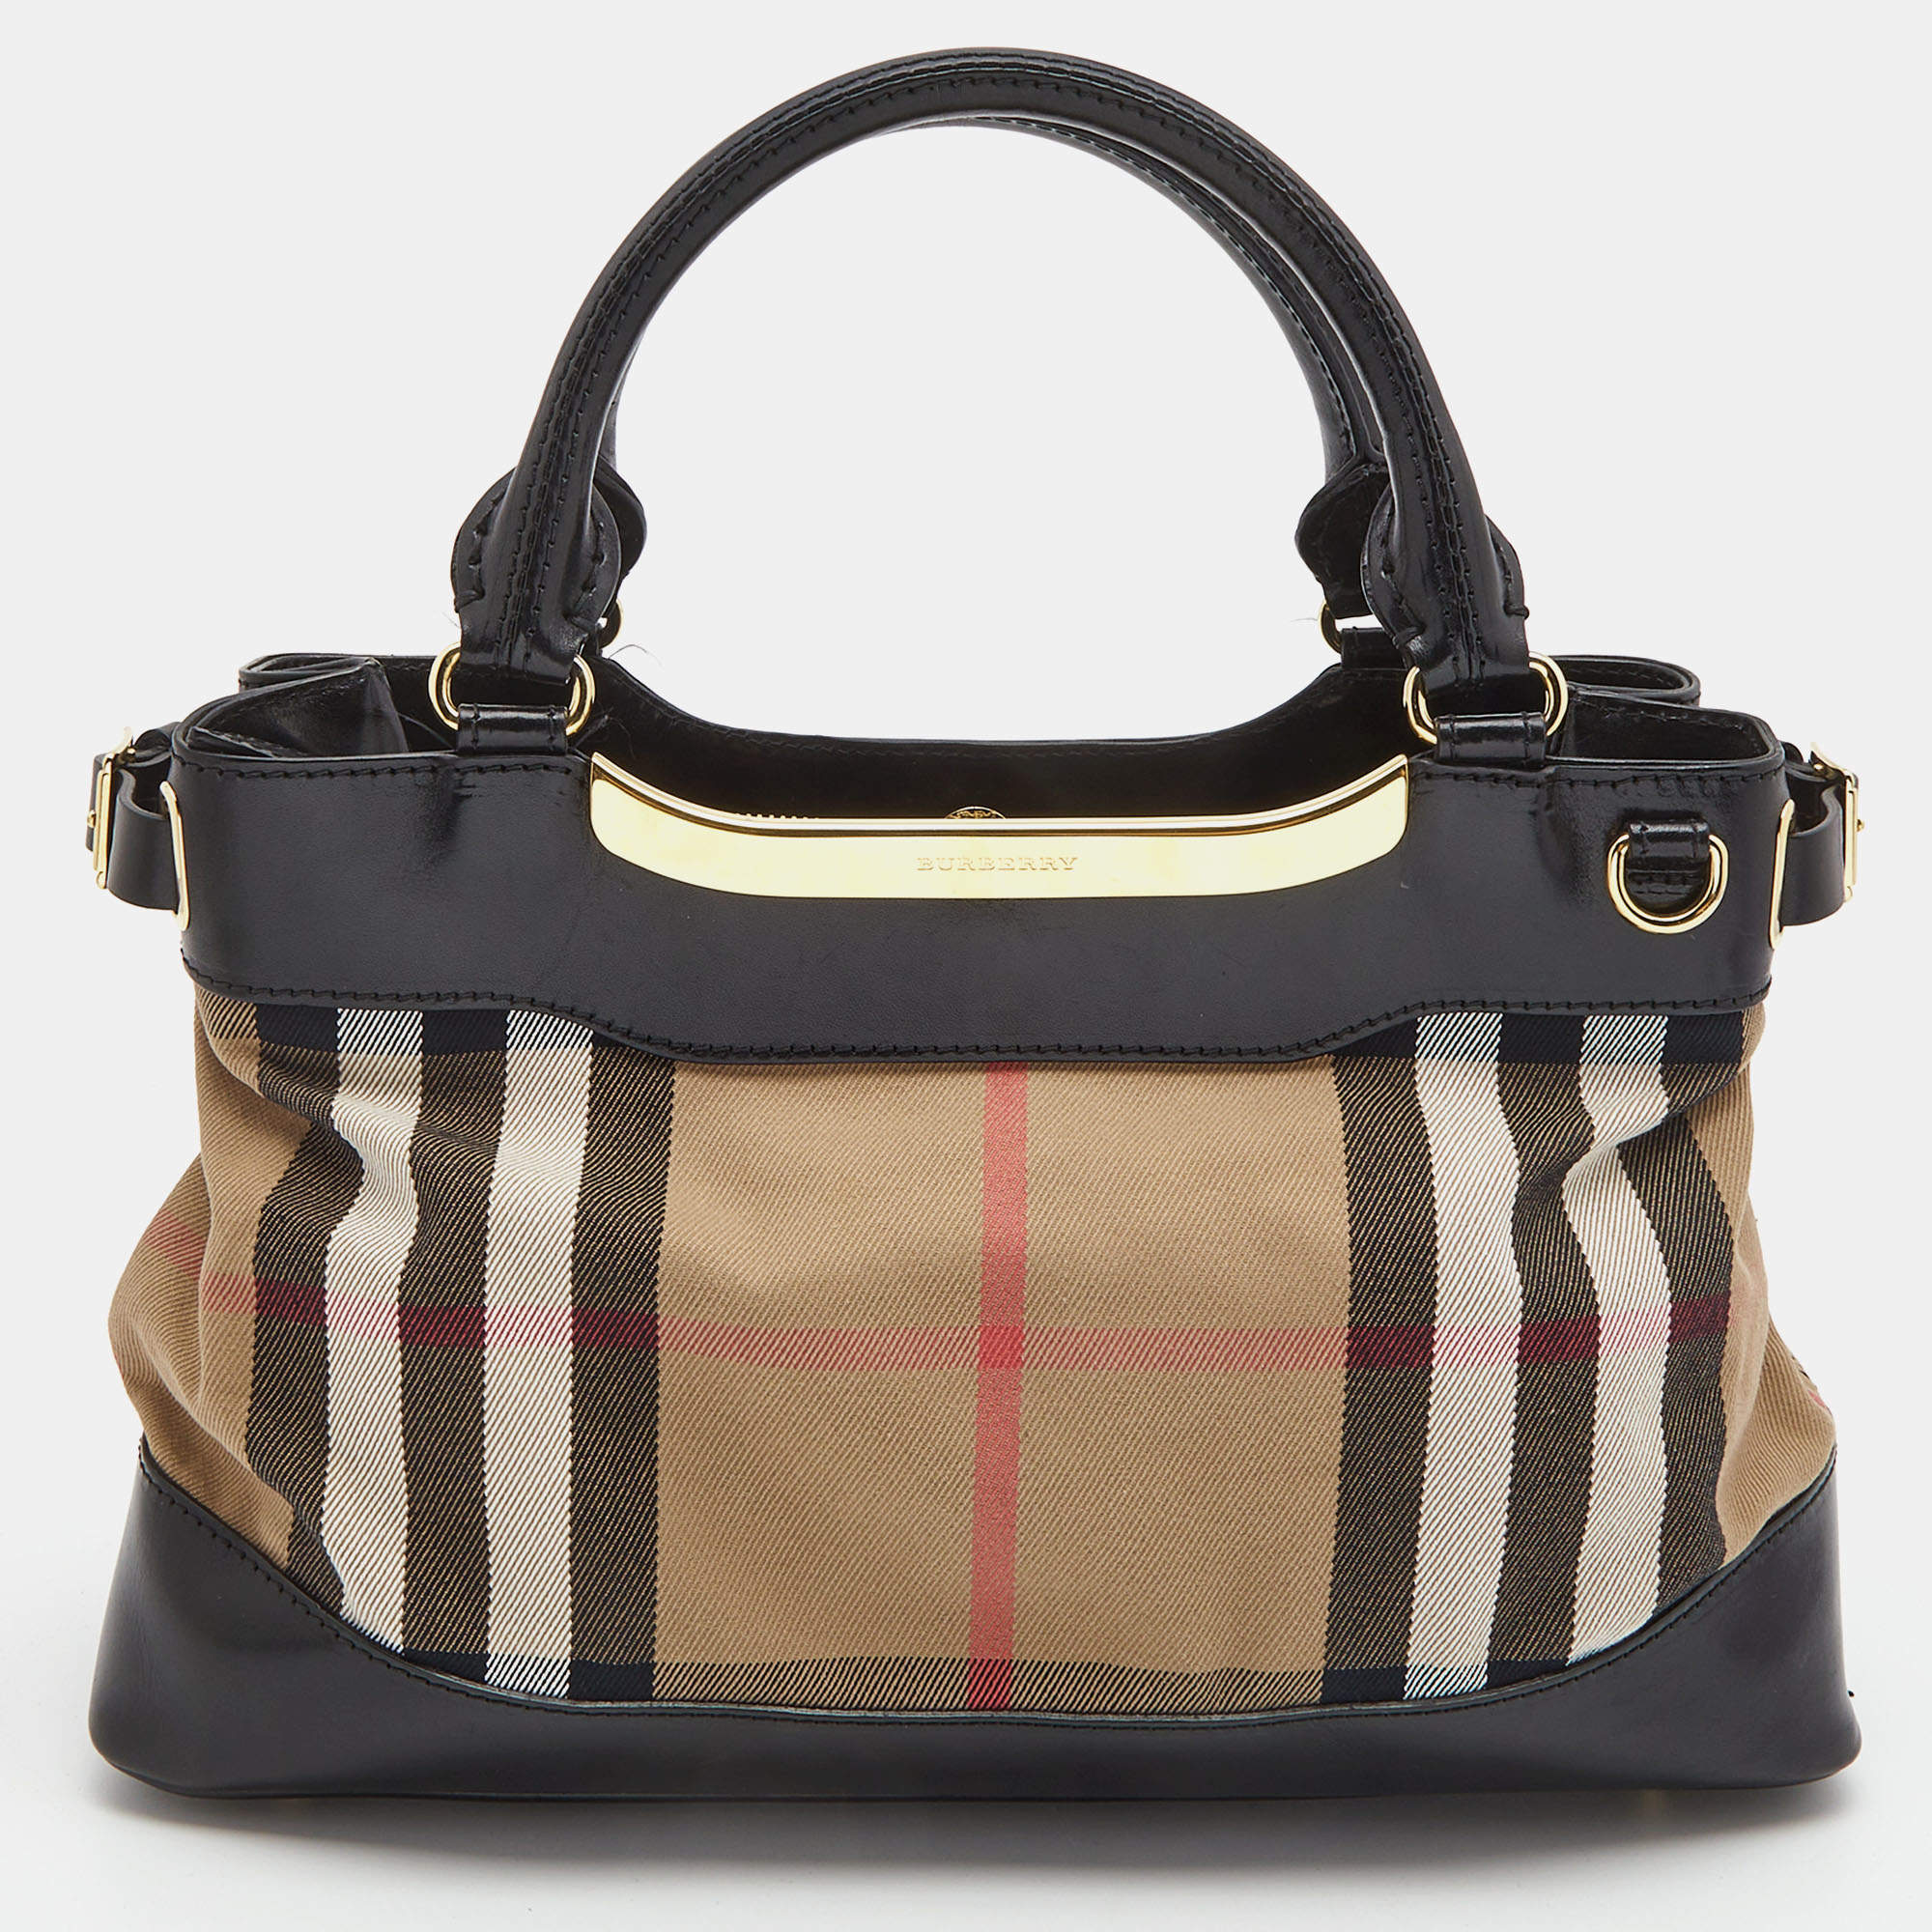 Burberry Black House Check Canvas and Leather Bridle Hepburn Tote Burberry